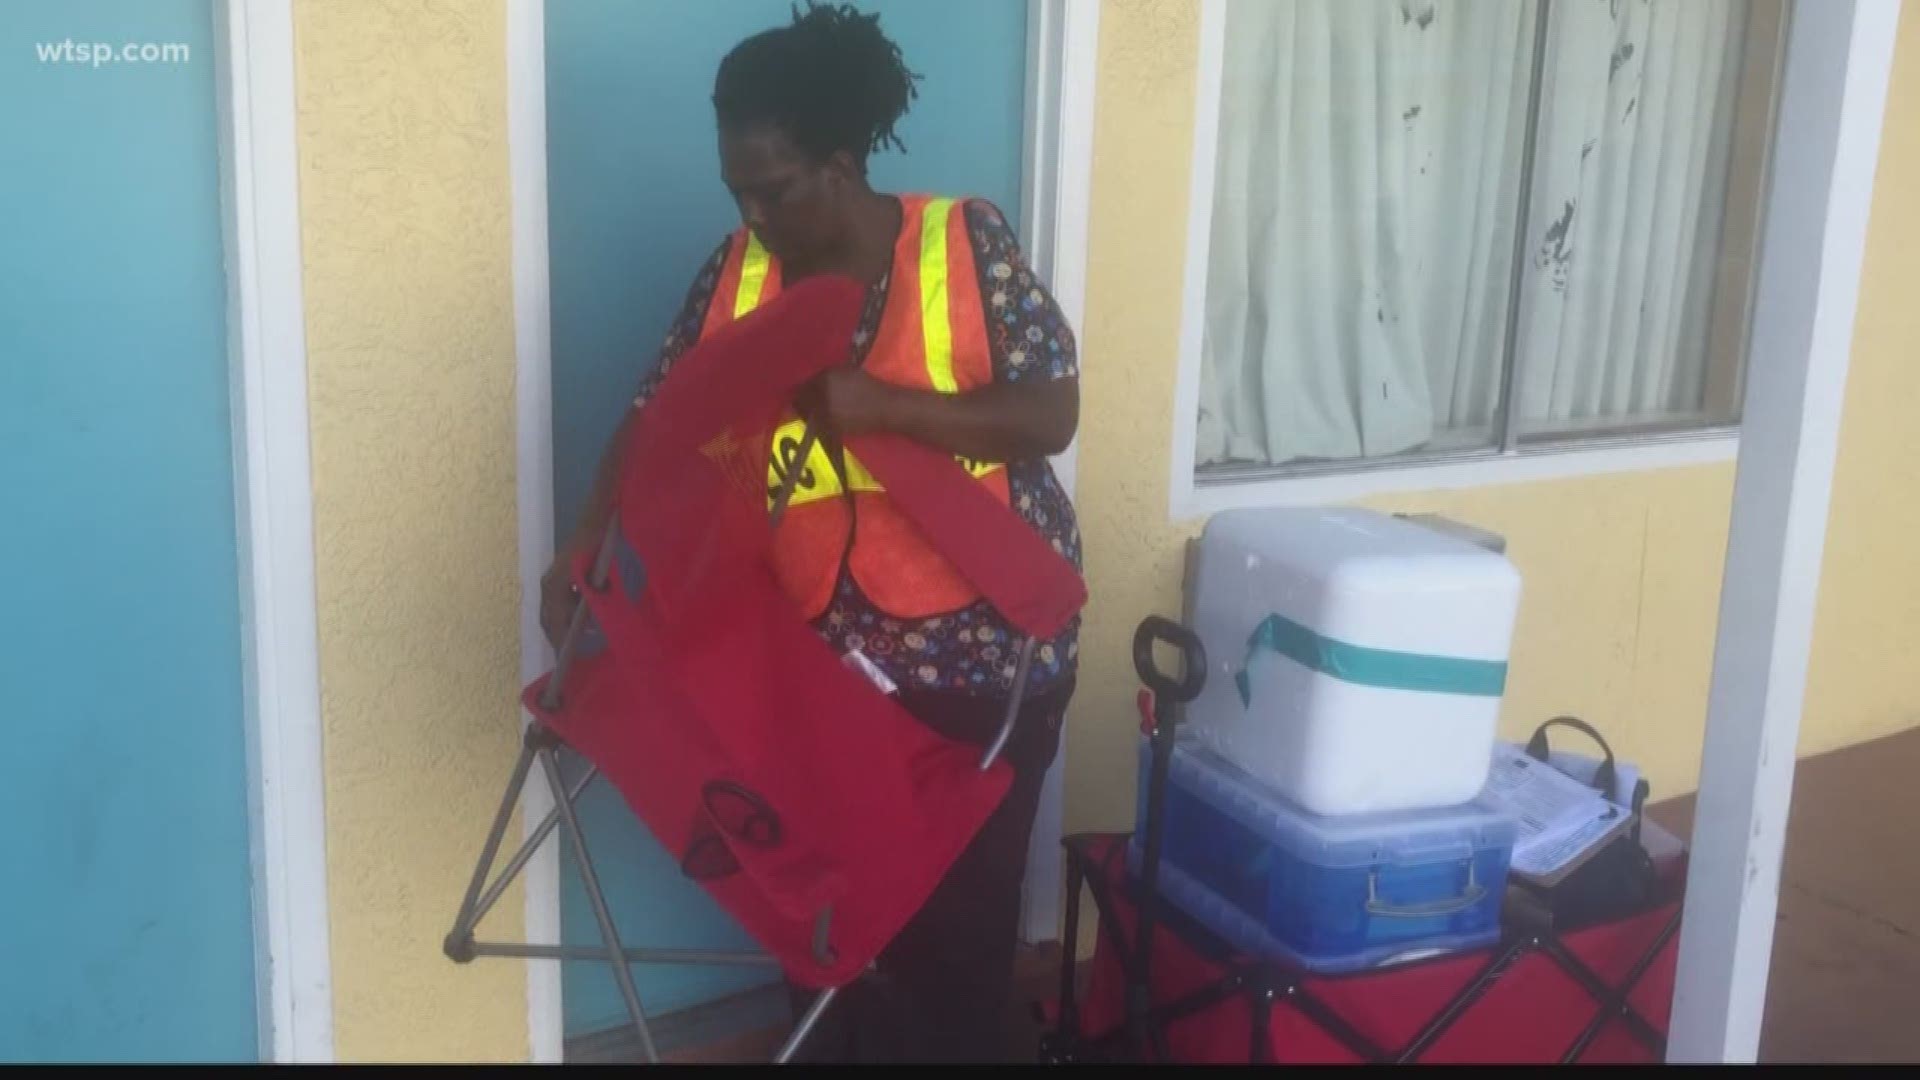 The health workers are going around with a wagon and a chair, offering the hepatitis A vaccine on the spot. It's a new idea to fight the spread of the disease, which is running wild in Florida.